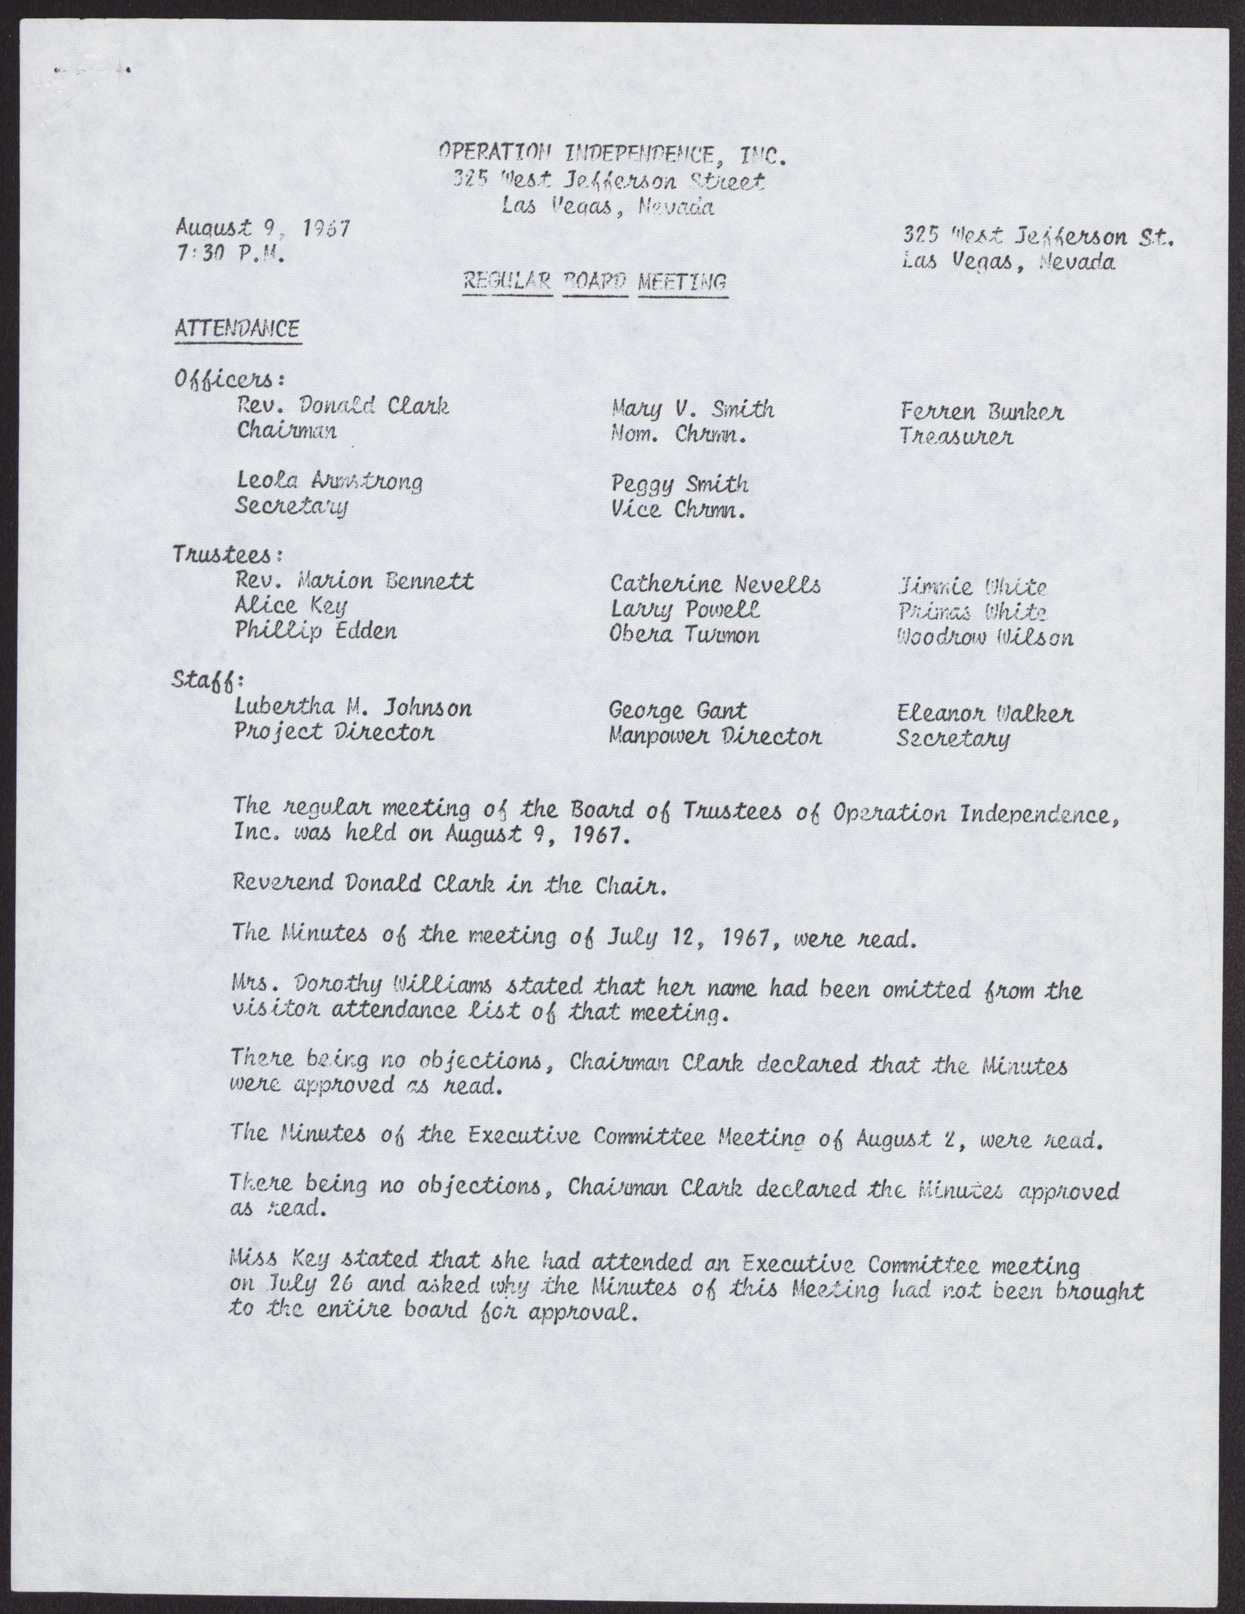 2 Copies of Minutes from Operation Independence Board Meeting (5 pages each), August 9, 1967